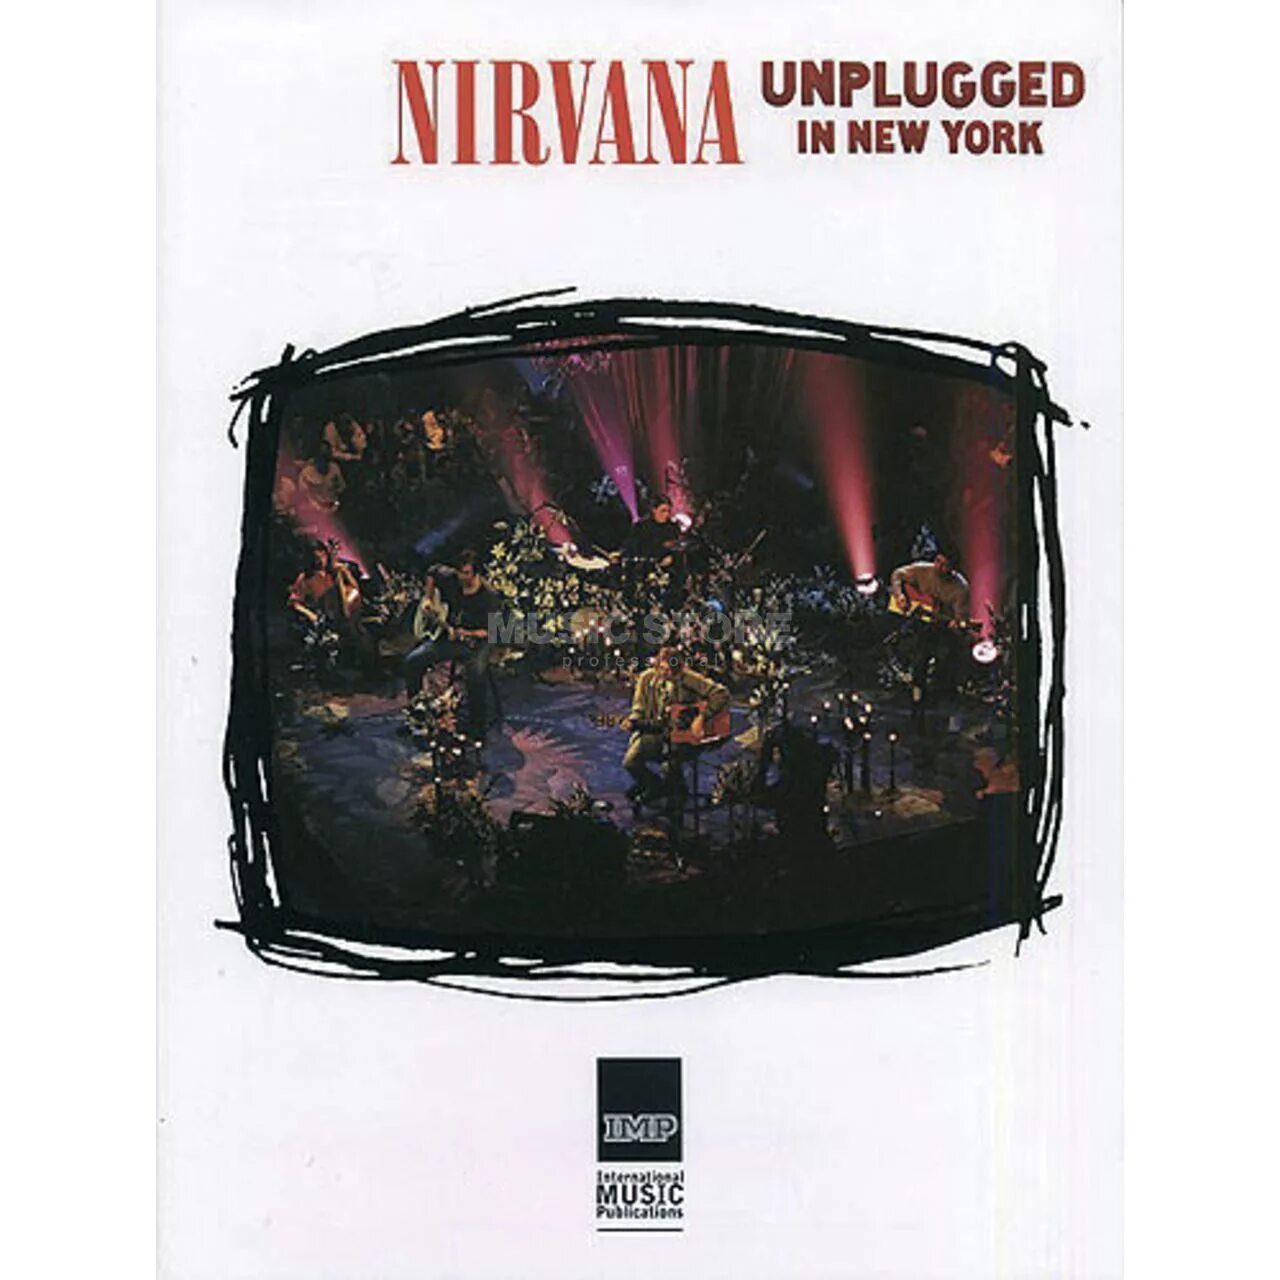 Nirvana unplugged in new. Nirvana MTV Unplugged in New York обложка. MTV Unplugged Nirvana обложка. Nirvana MTV Unplugged in New York 1994. Nirvana Unplugged in New York обложка альбома.